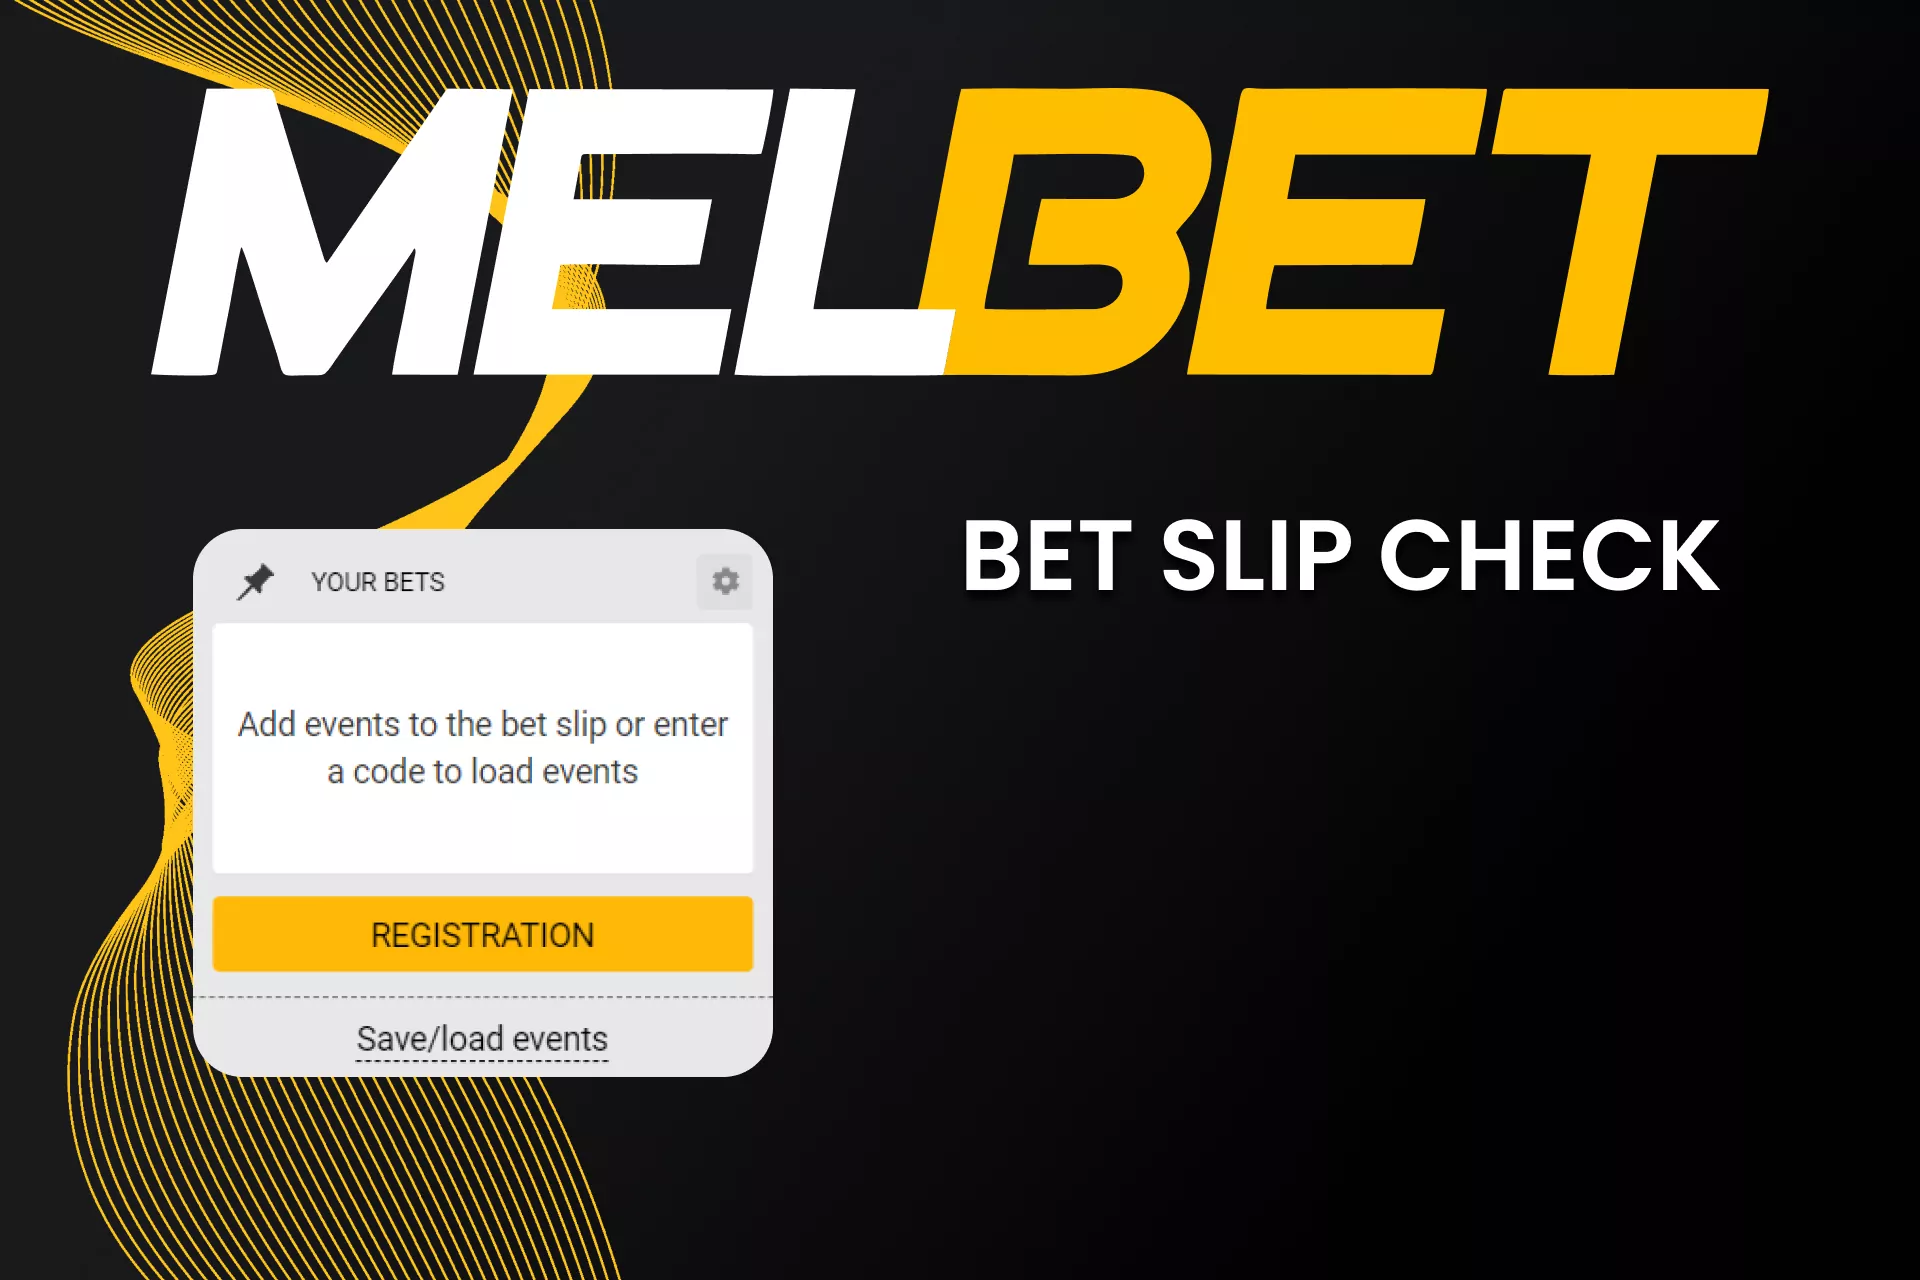 Save and check your bets on Melbet.